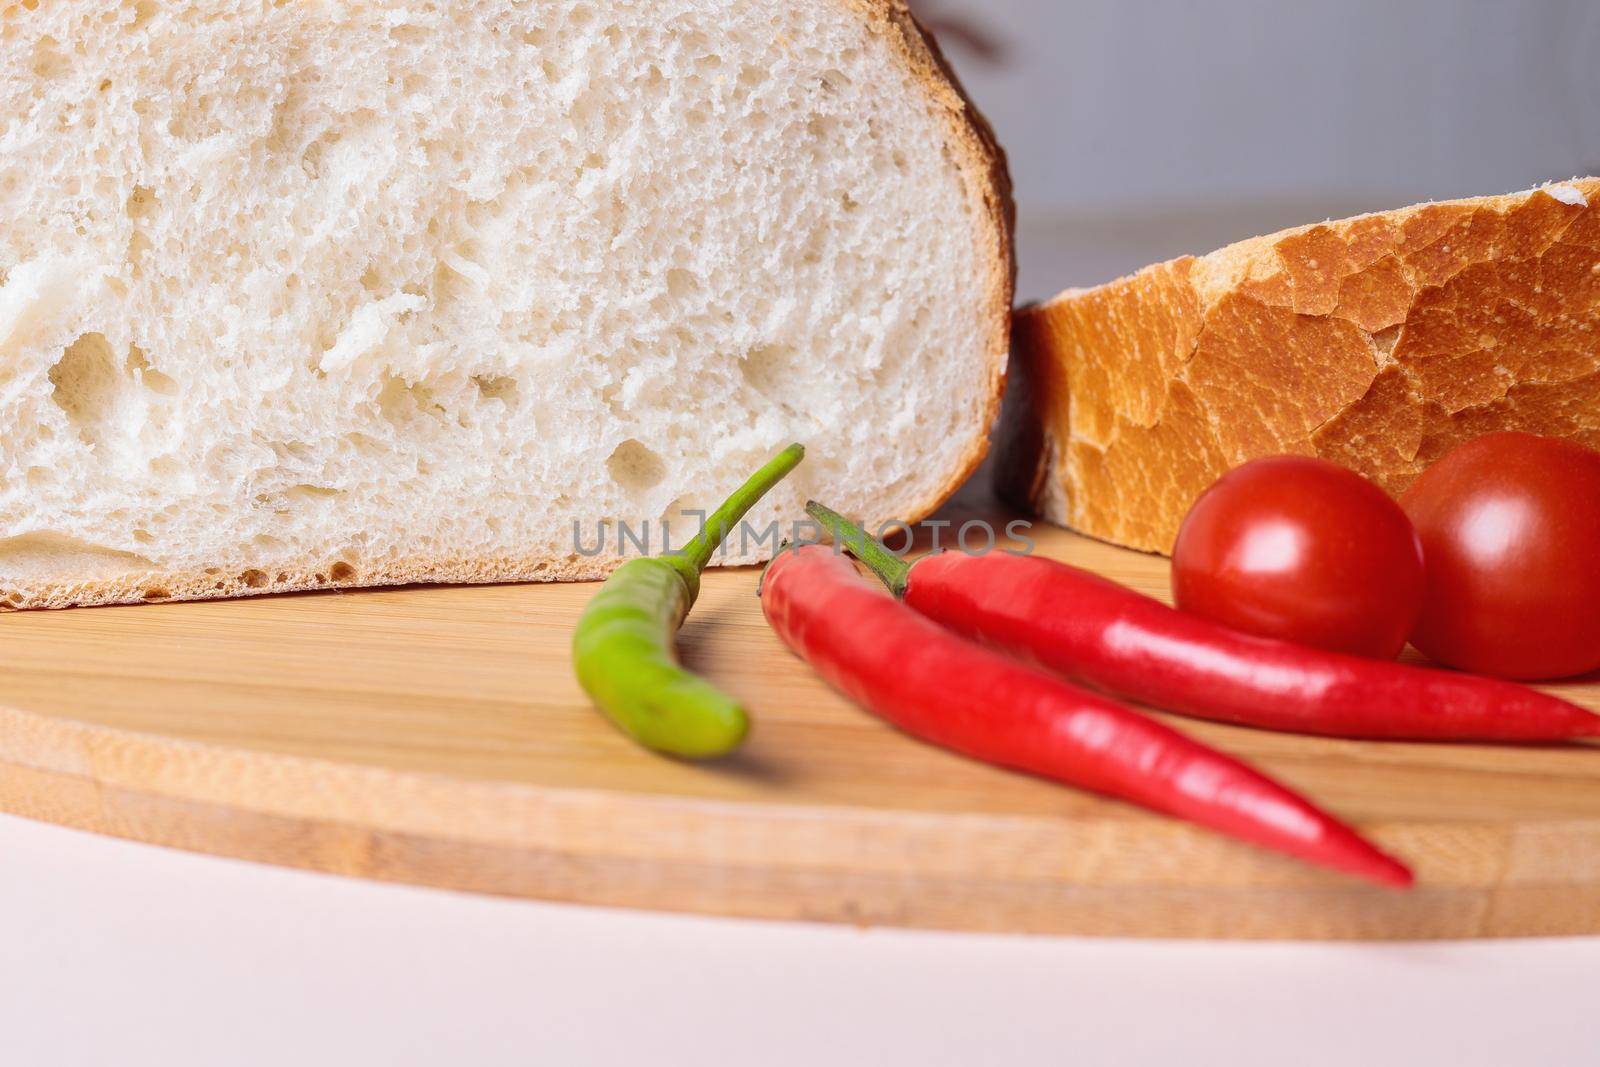 Sliced pieces of white bread with red peppers and tomatoes on a cutting board. Light background